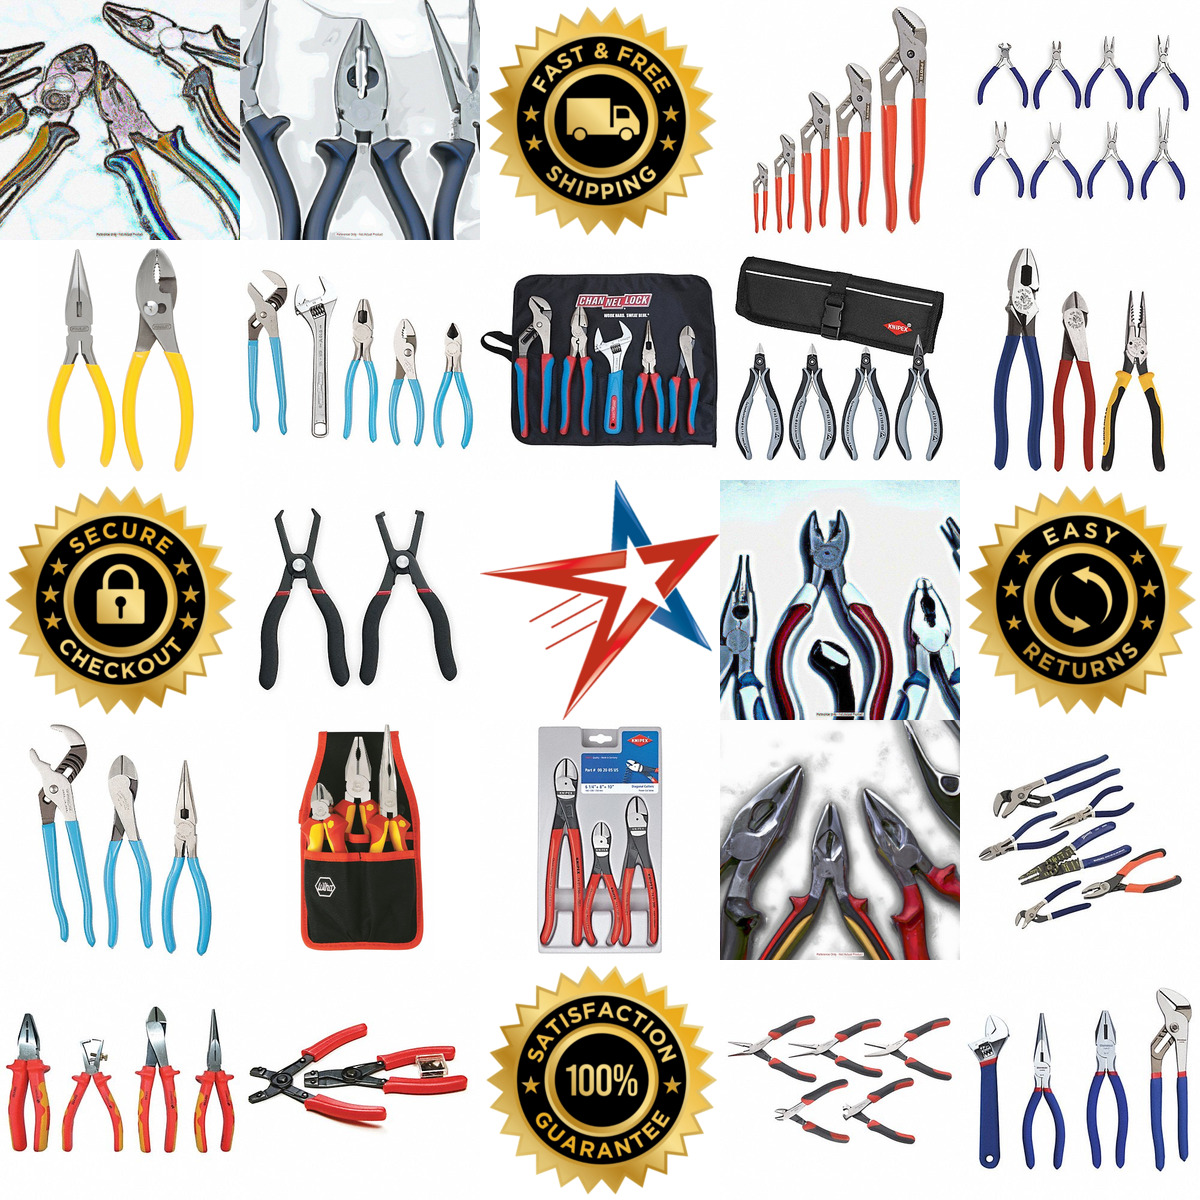 A selection of Assorted Plier Sets products on GoVets